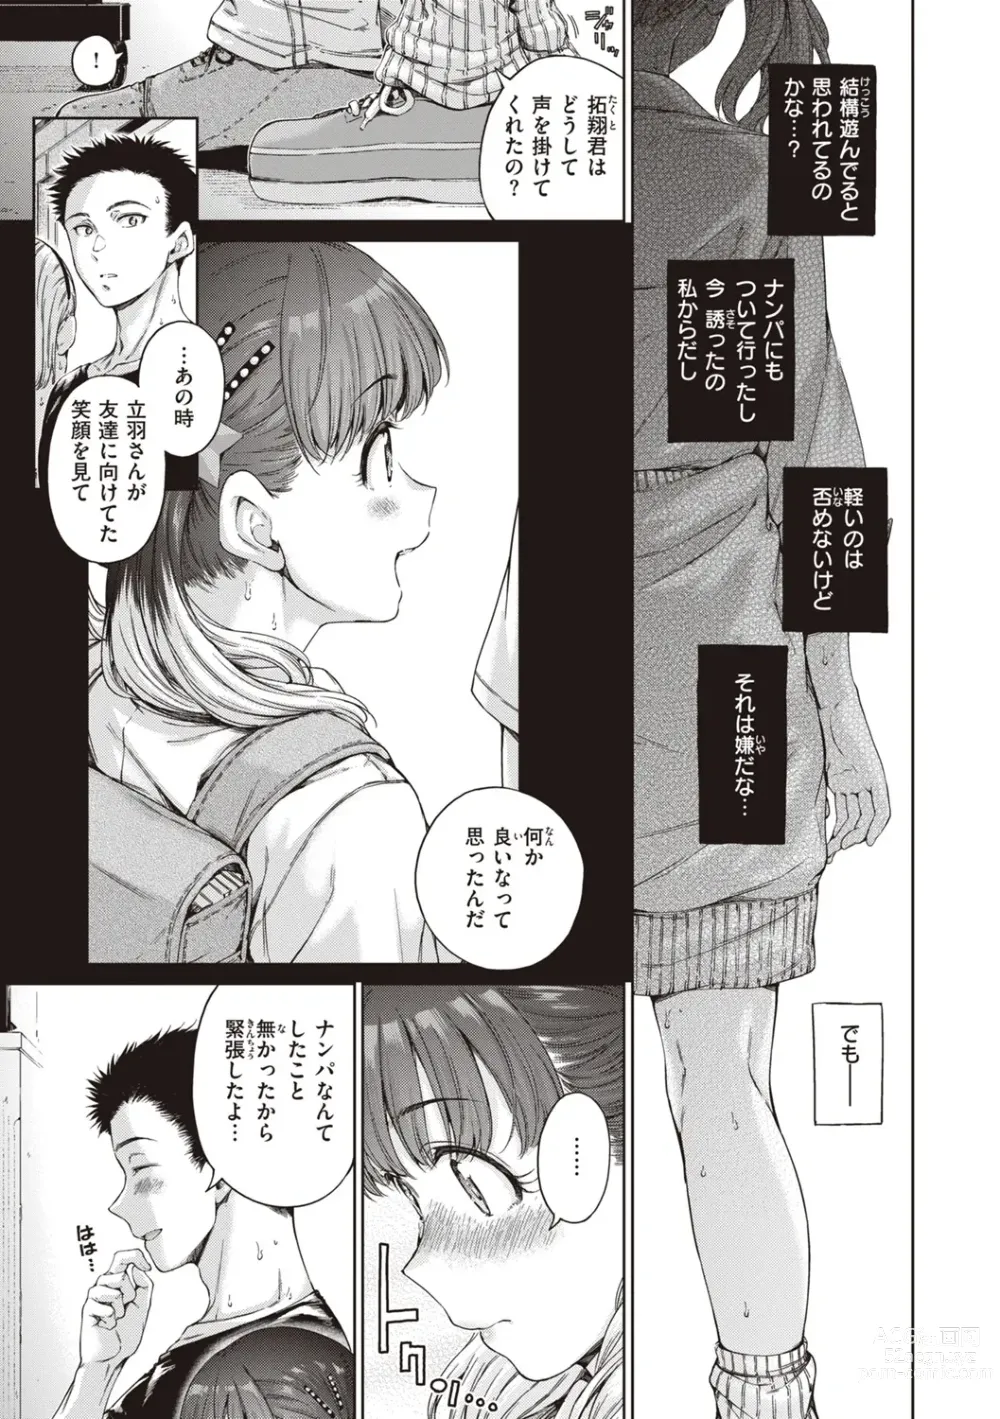 Page 13 of manga Wataame to Caramel - Cotton Candy and Caramel